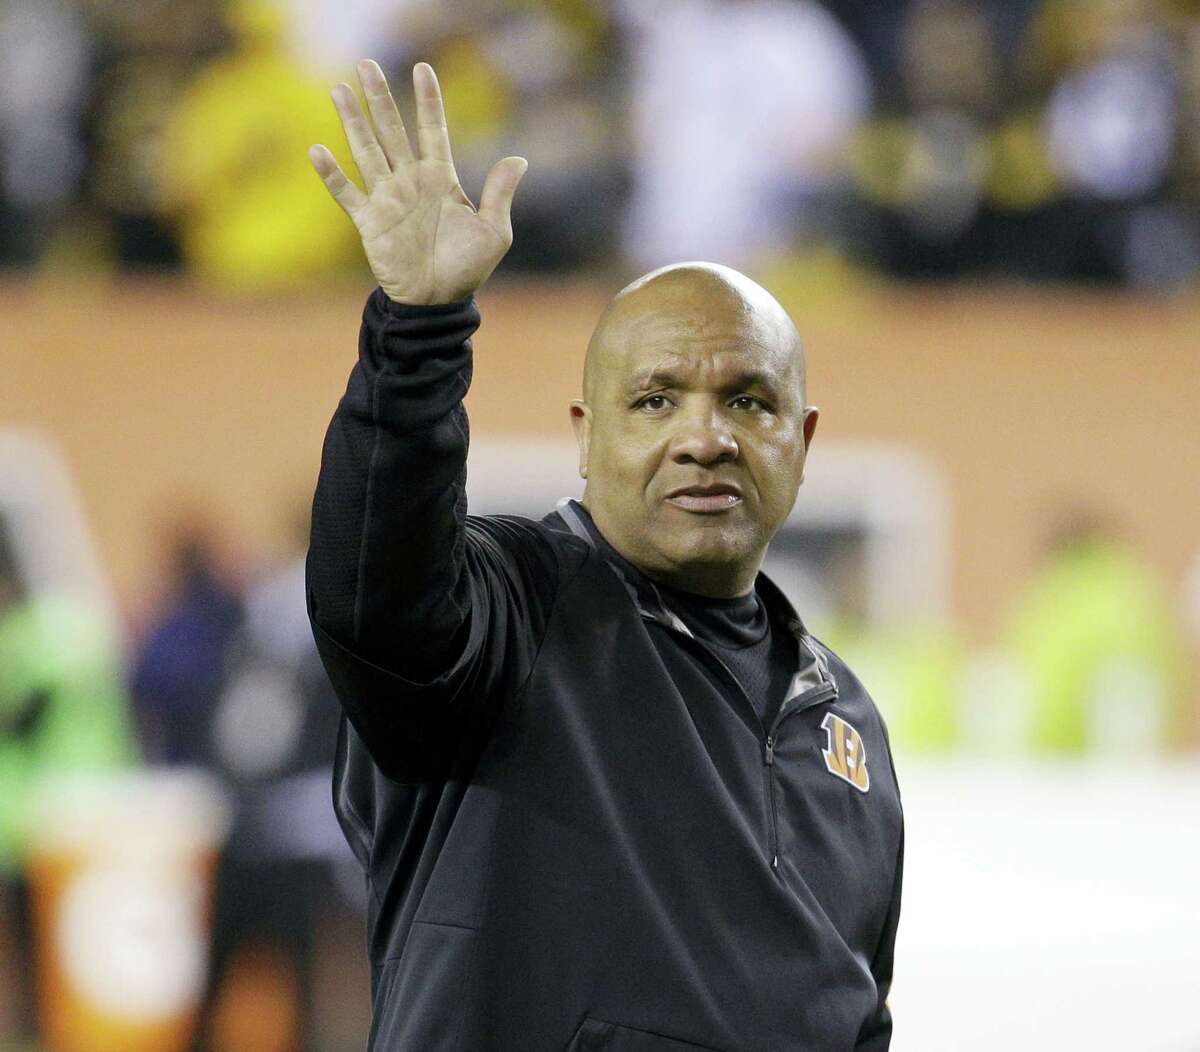 John Minchillo — The Associated Press This Jan. 9, 2016 file photo shows Cincinnati Bengals offensive coordinator Hue Jackson before an NFL wild-card playoff football game between the Cincinnati Bengals and the Pittsburgh Steelers in Cincinnati. Just hours after Cincinnati lost to Pittsburgh — and after meeting with the San Francisco 49ers about becoming their next coach — Jackson interviewed for the Browns’ coaching vacancy.